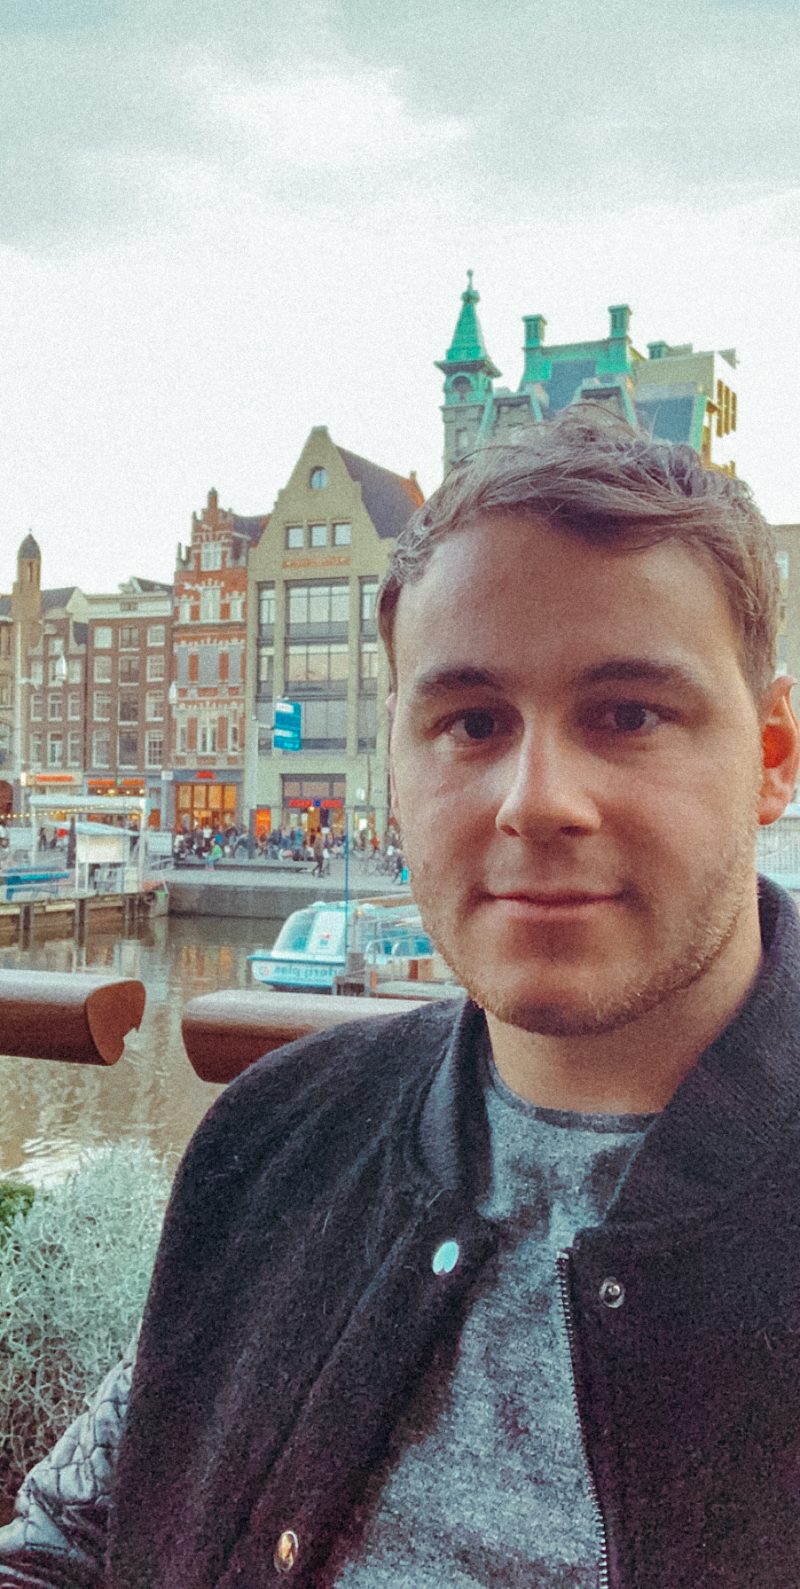 A man posing infront of buildings in Amsterdam